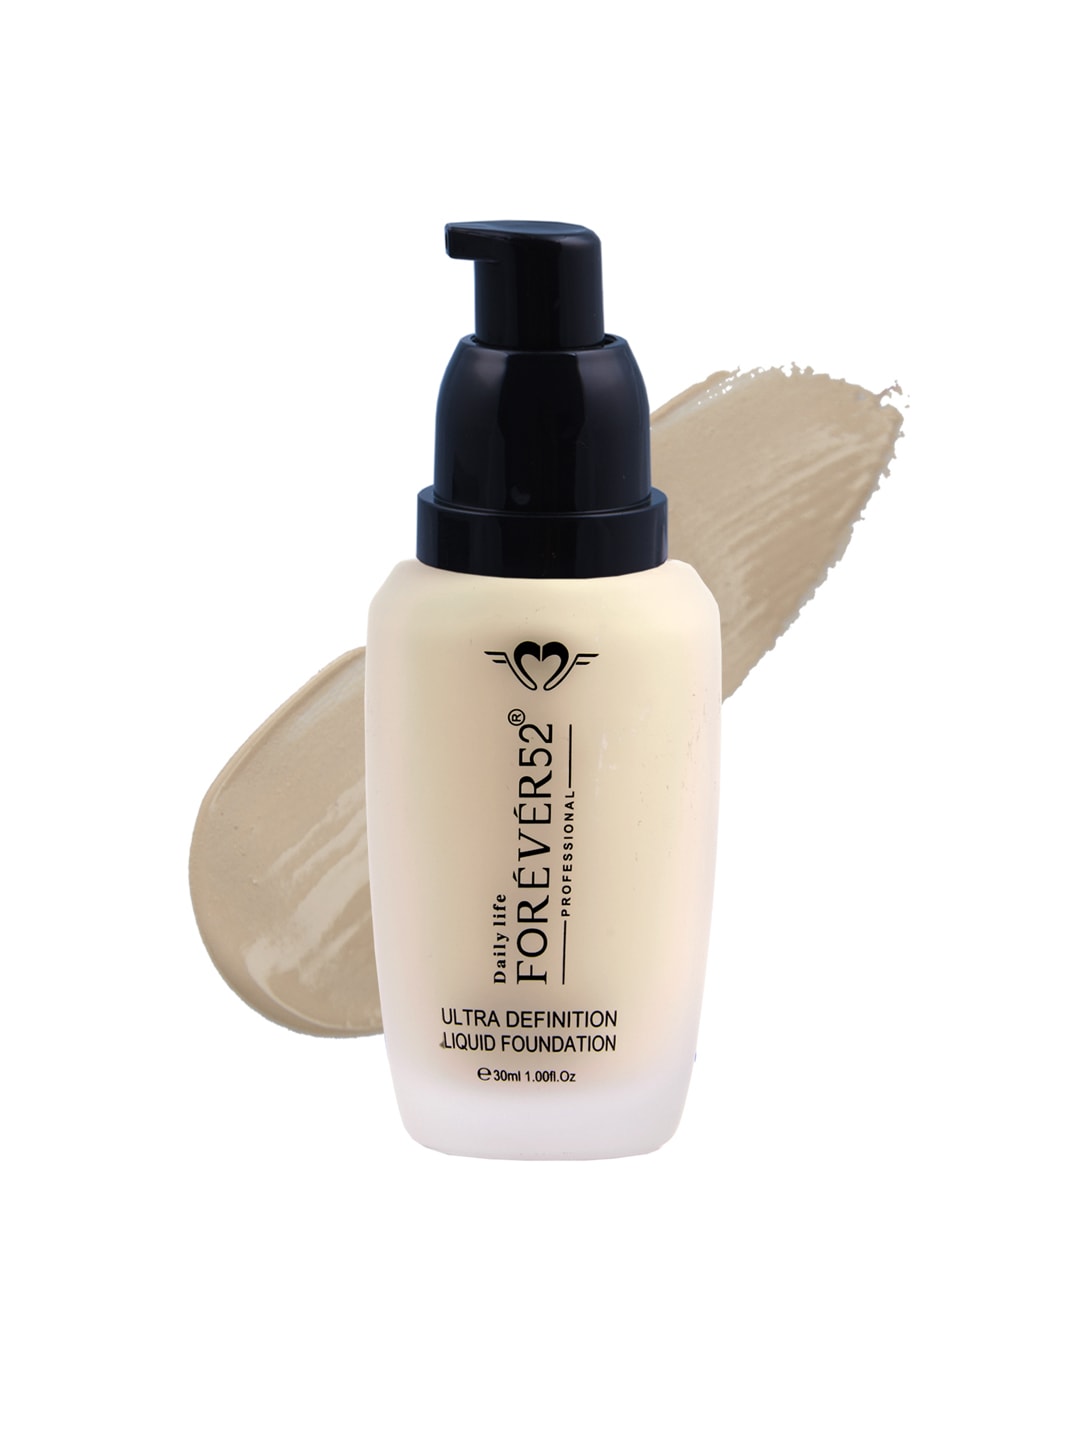 Daily Life Forever52 Ultra Definition Liquid Foundation - Cheesecake 30 ml Price in India